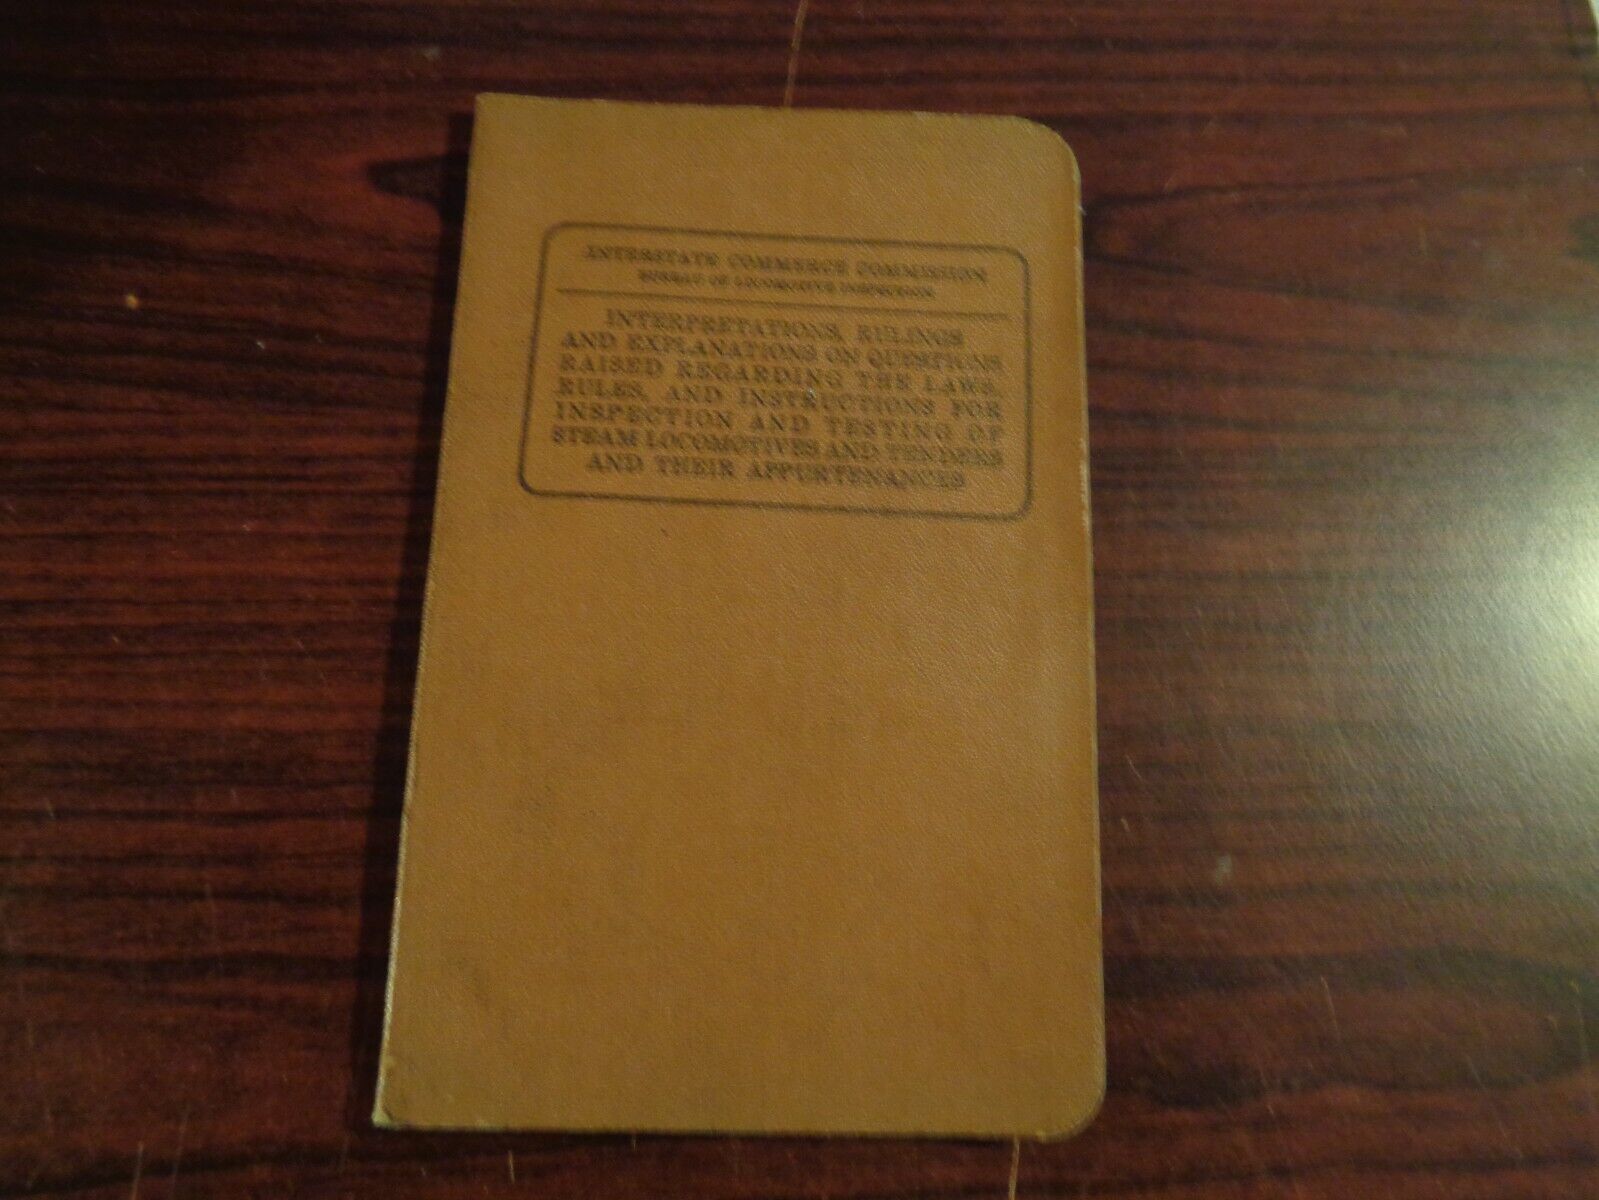 1938 Antique Interstate Commerce Commission Laws Rules and Instructions booklet